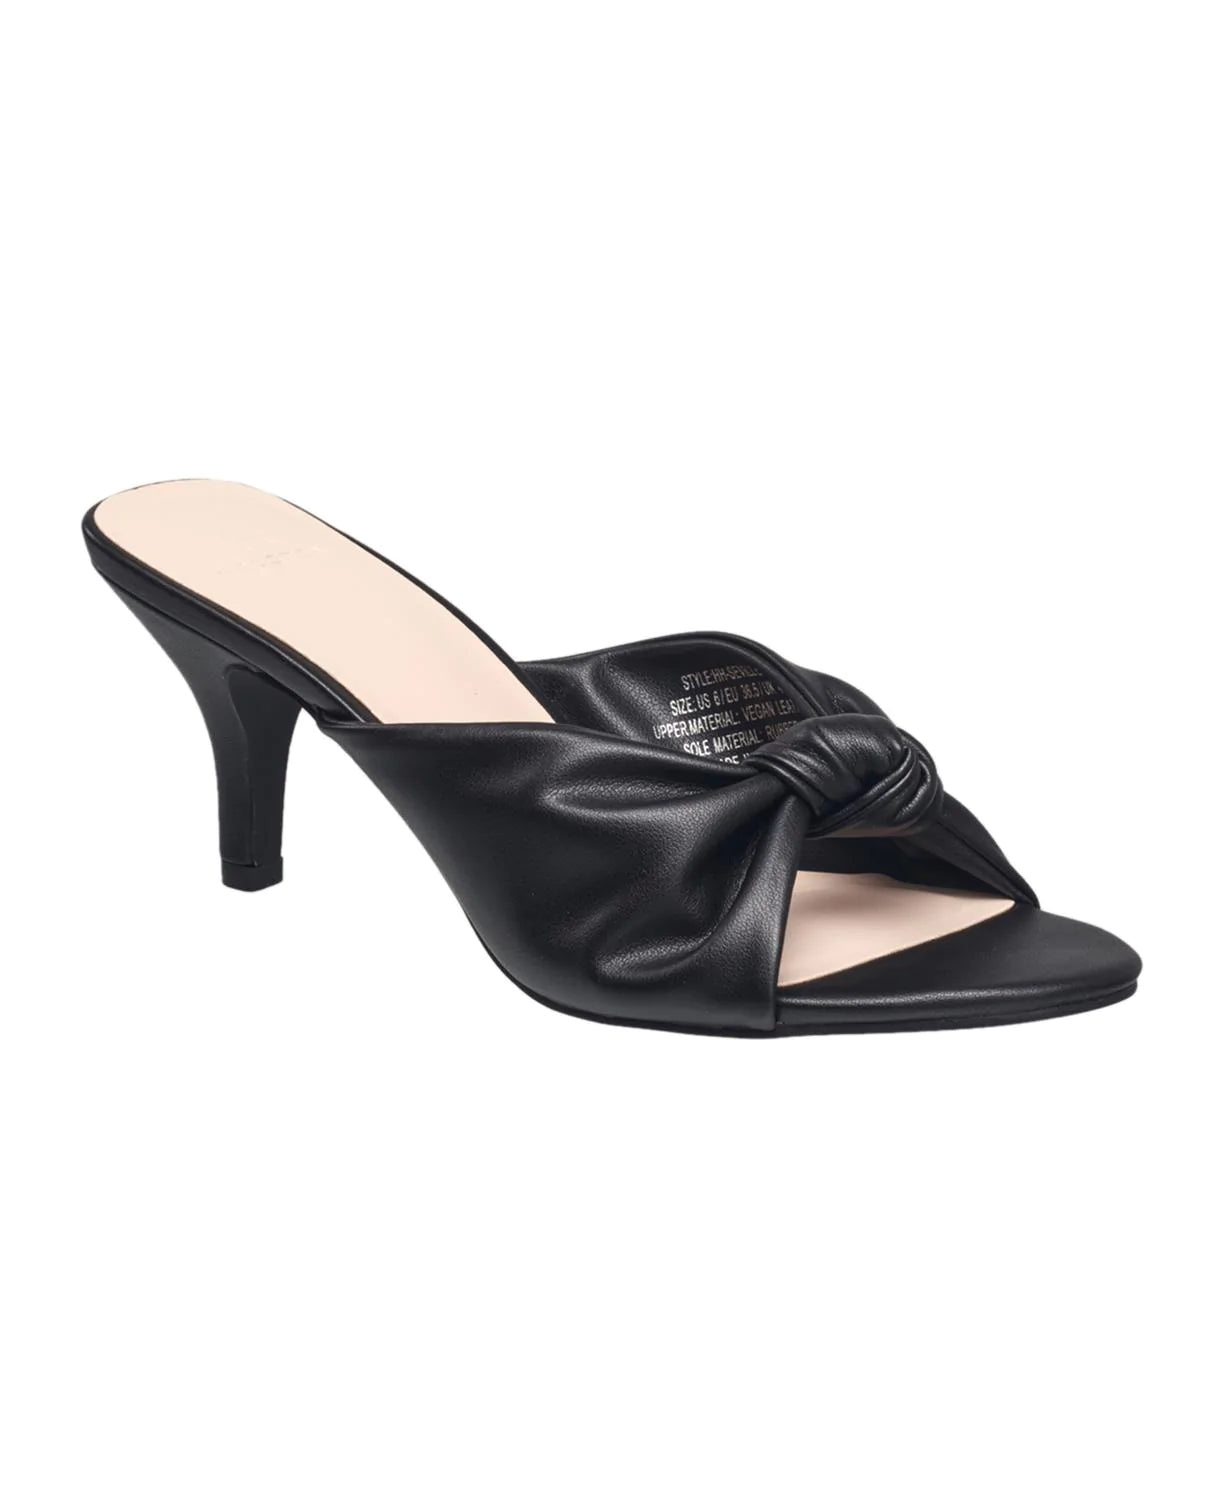 H Halston Women's Seviille Knotted Bow Heel  Color Black Size 9M